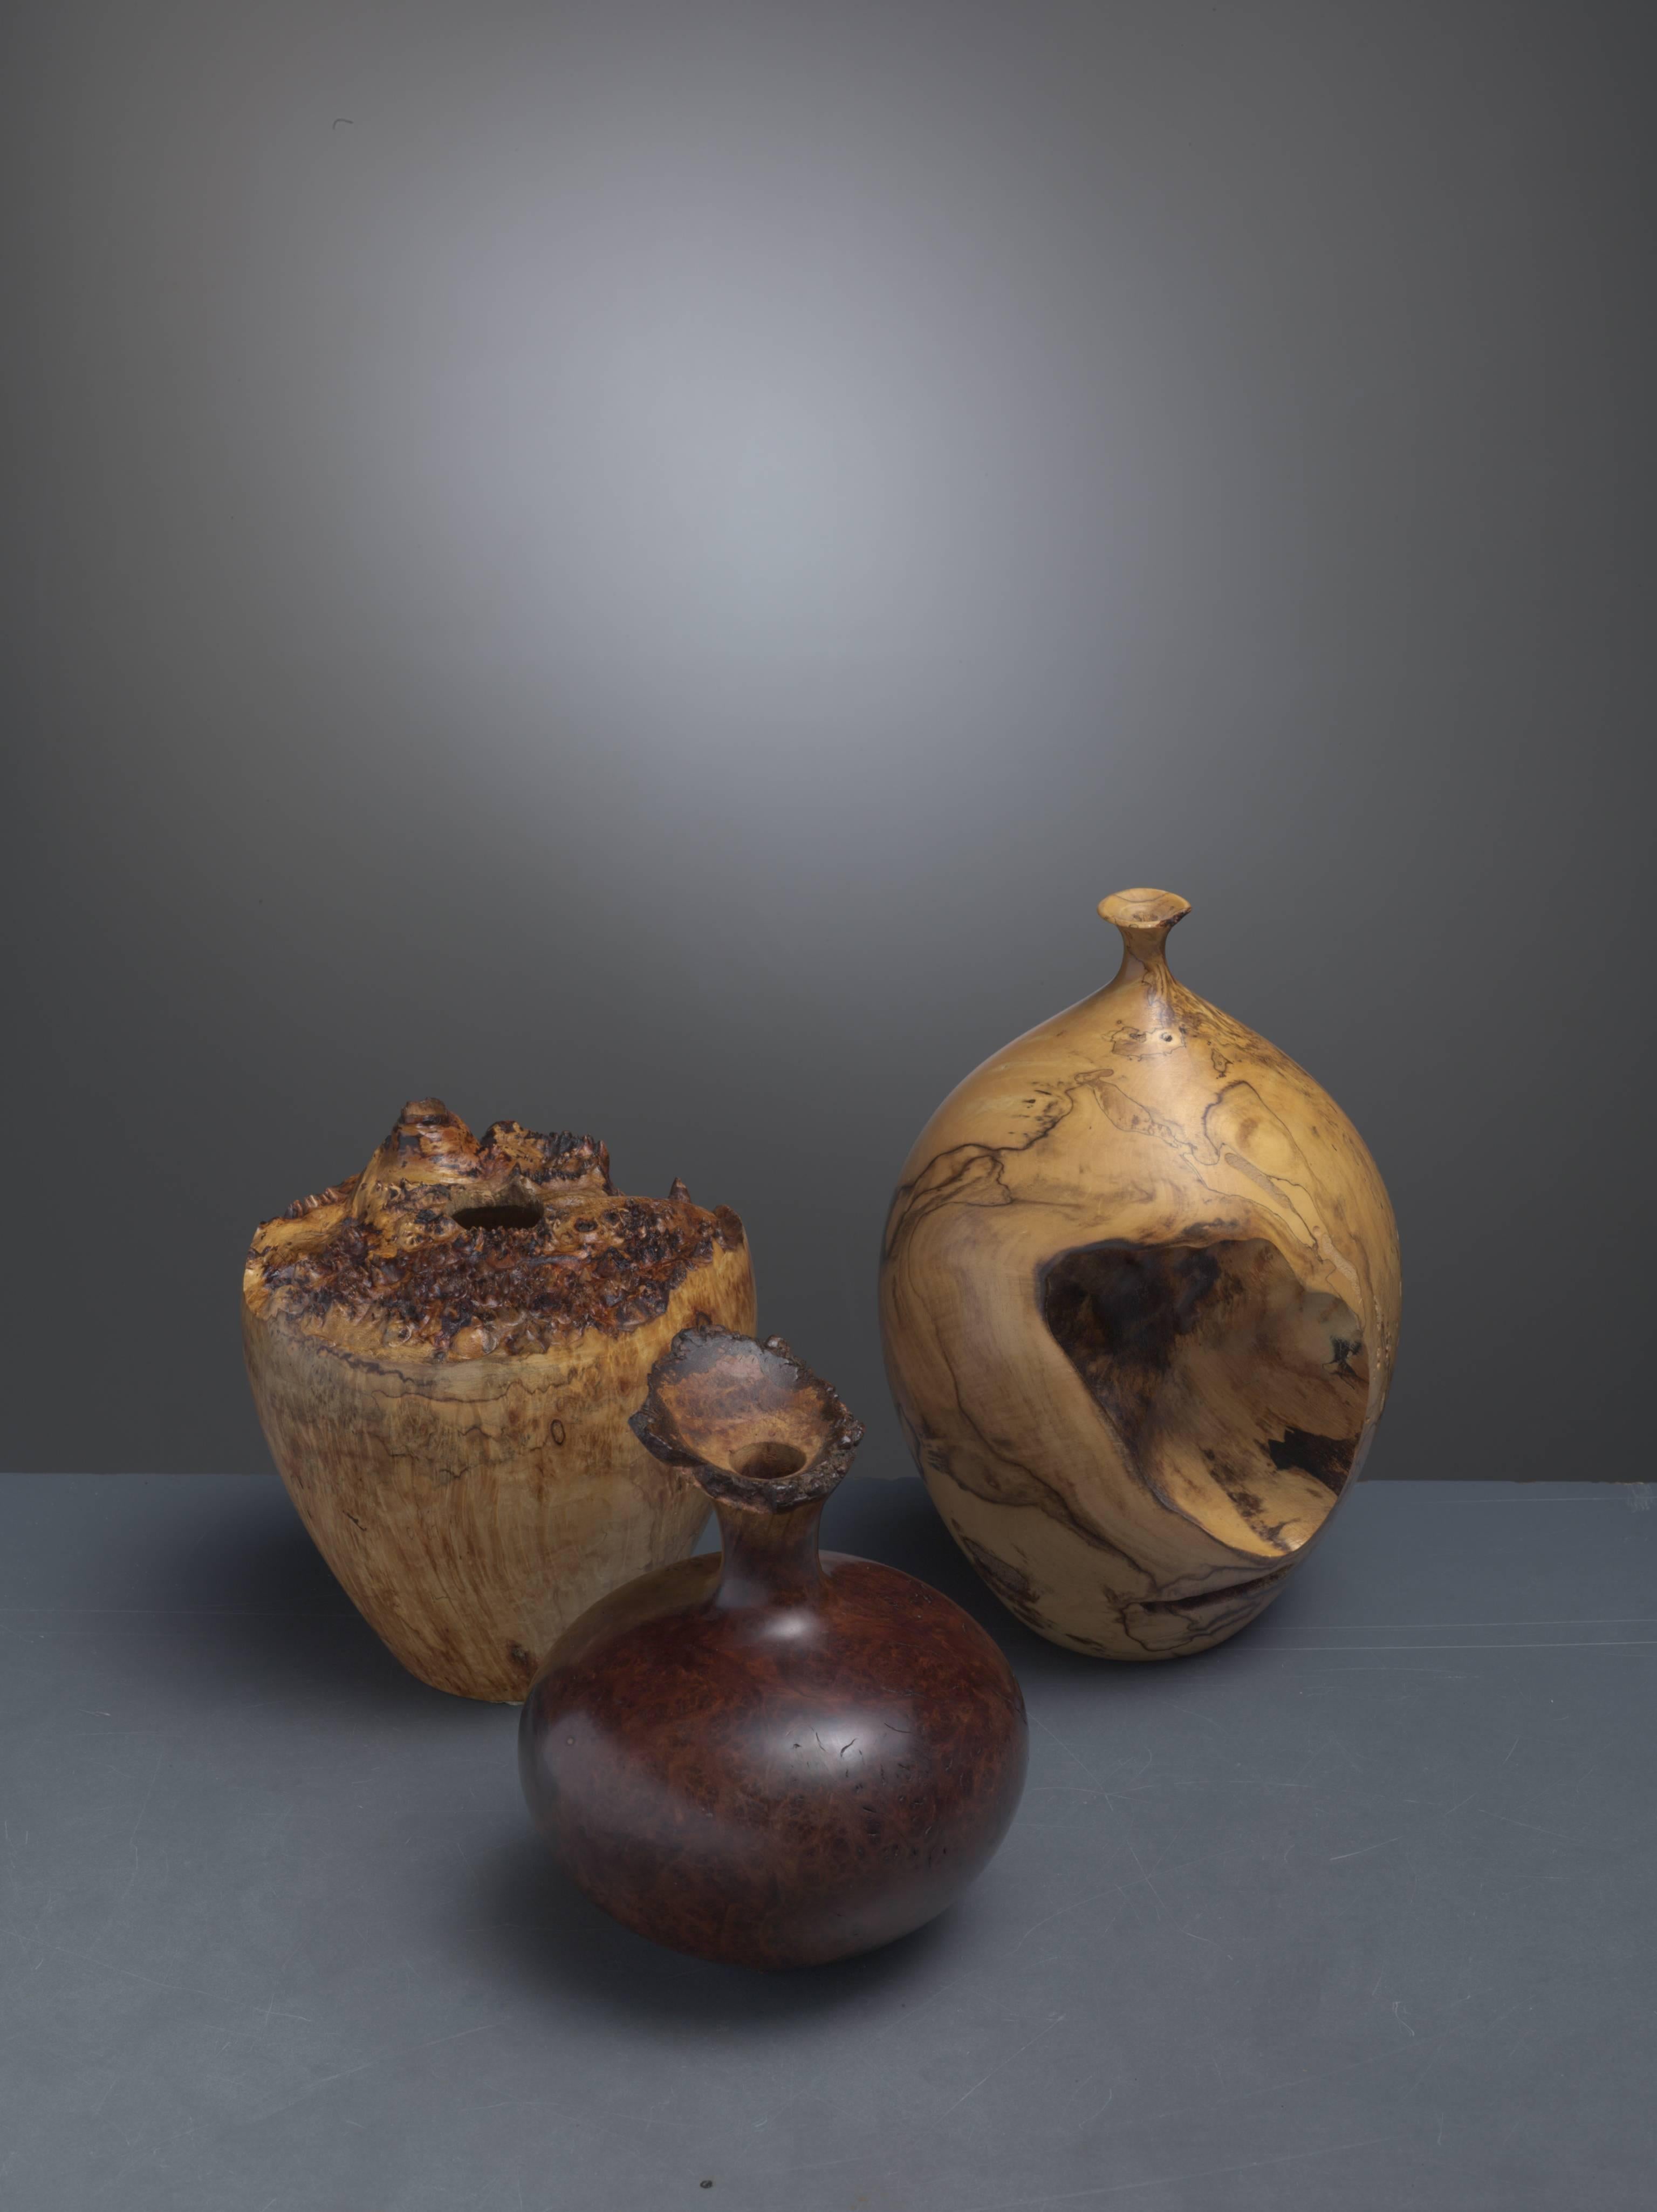 A set of three turned vases from different types of burl wood. The set consists of these pieces:

A vase with a very small opening by Hap Sakwa in buckeye. Signed by Sakwa with the year of production (1980). Measures: Diameter of 12.5 cm and 19 cm